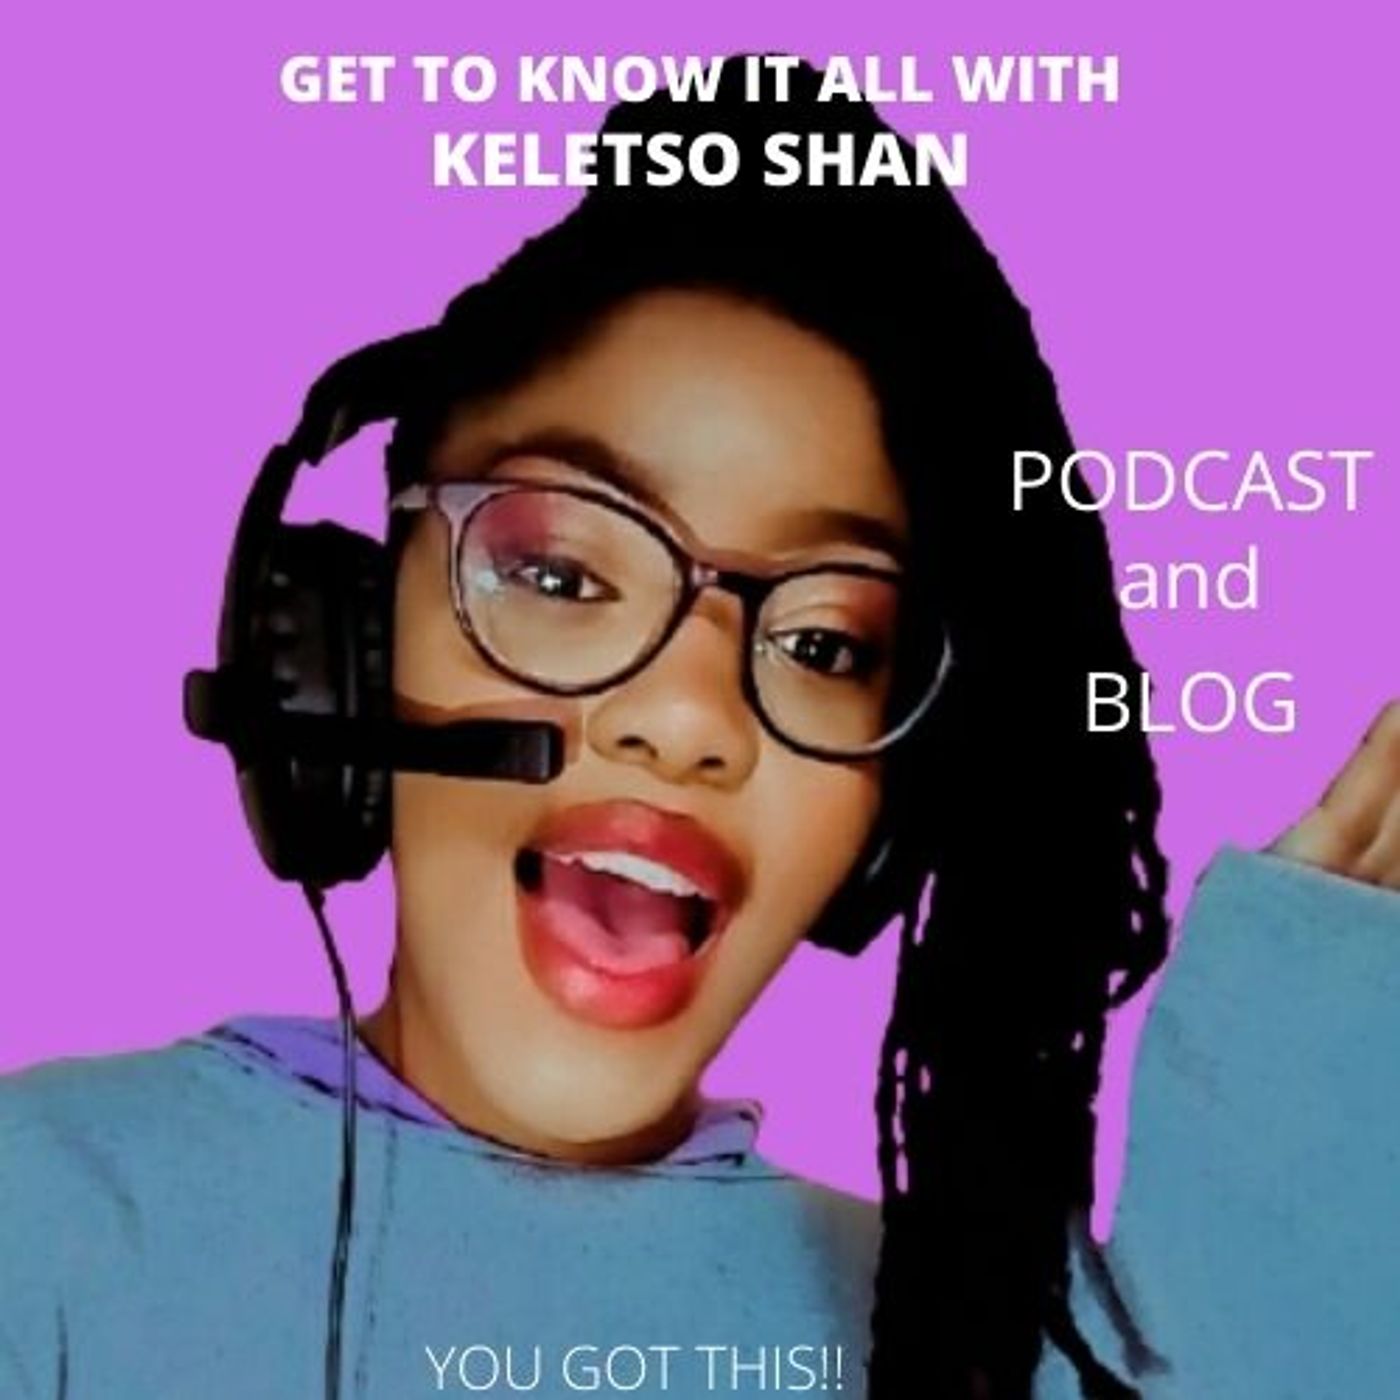 Get to know it all with keletso shan